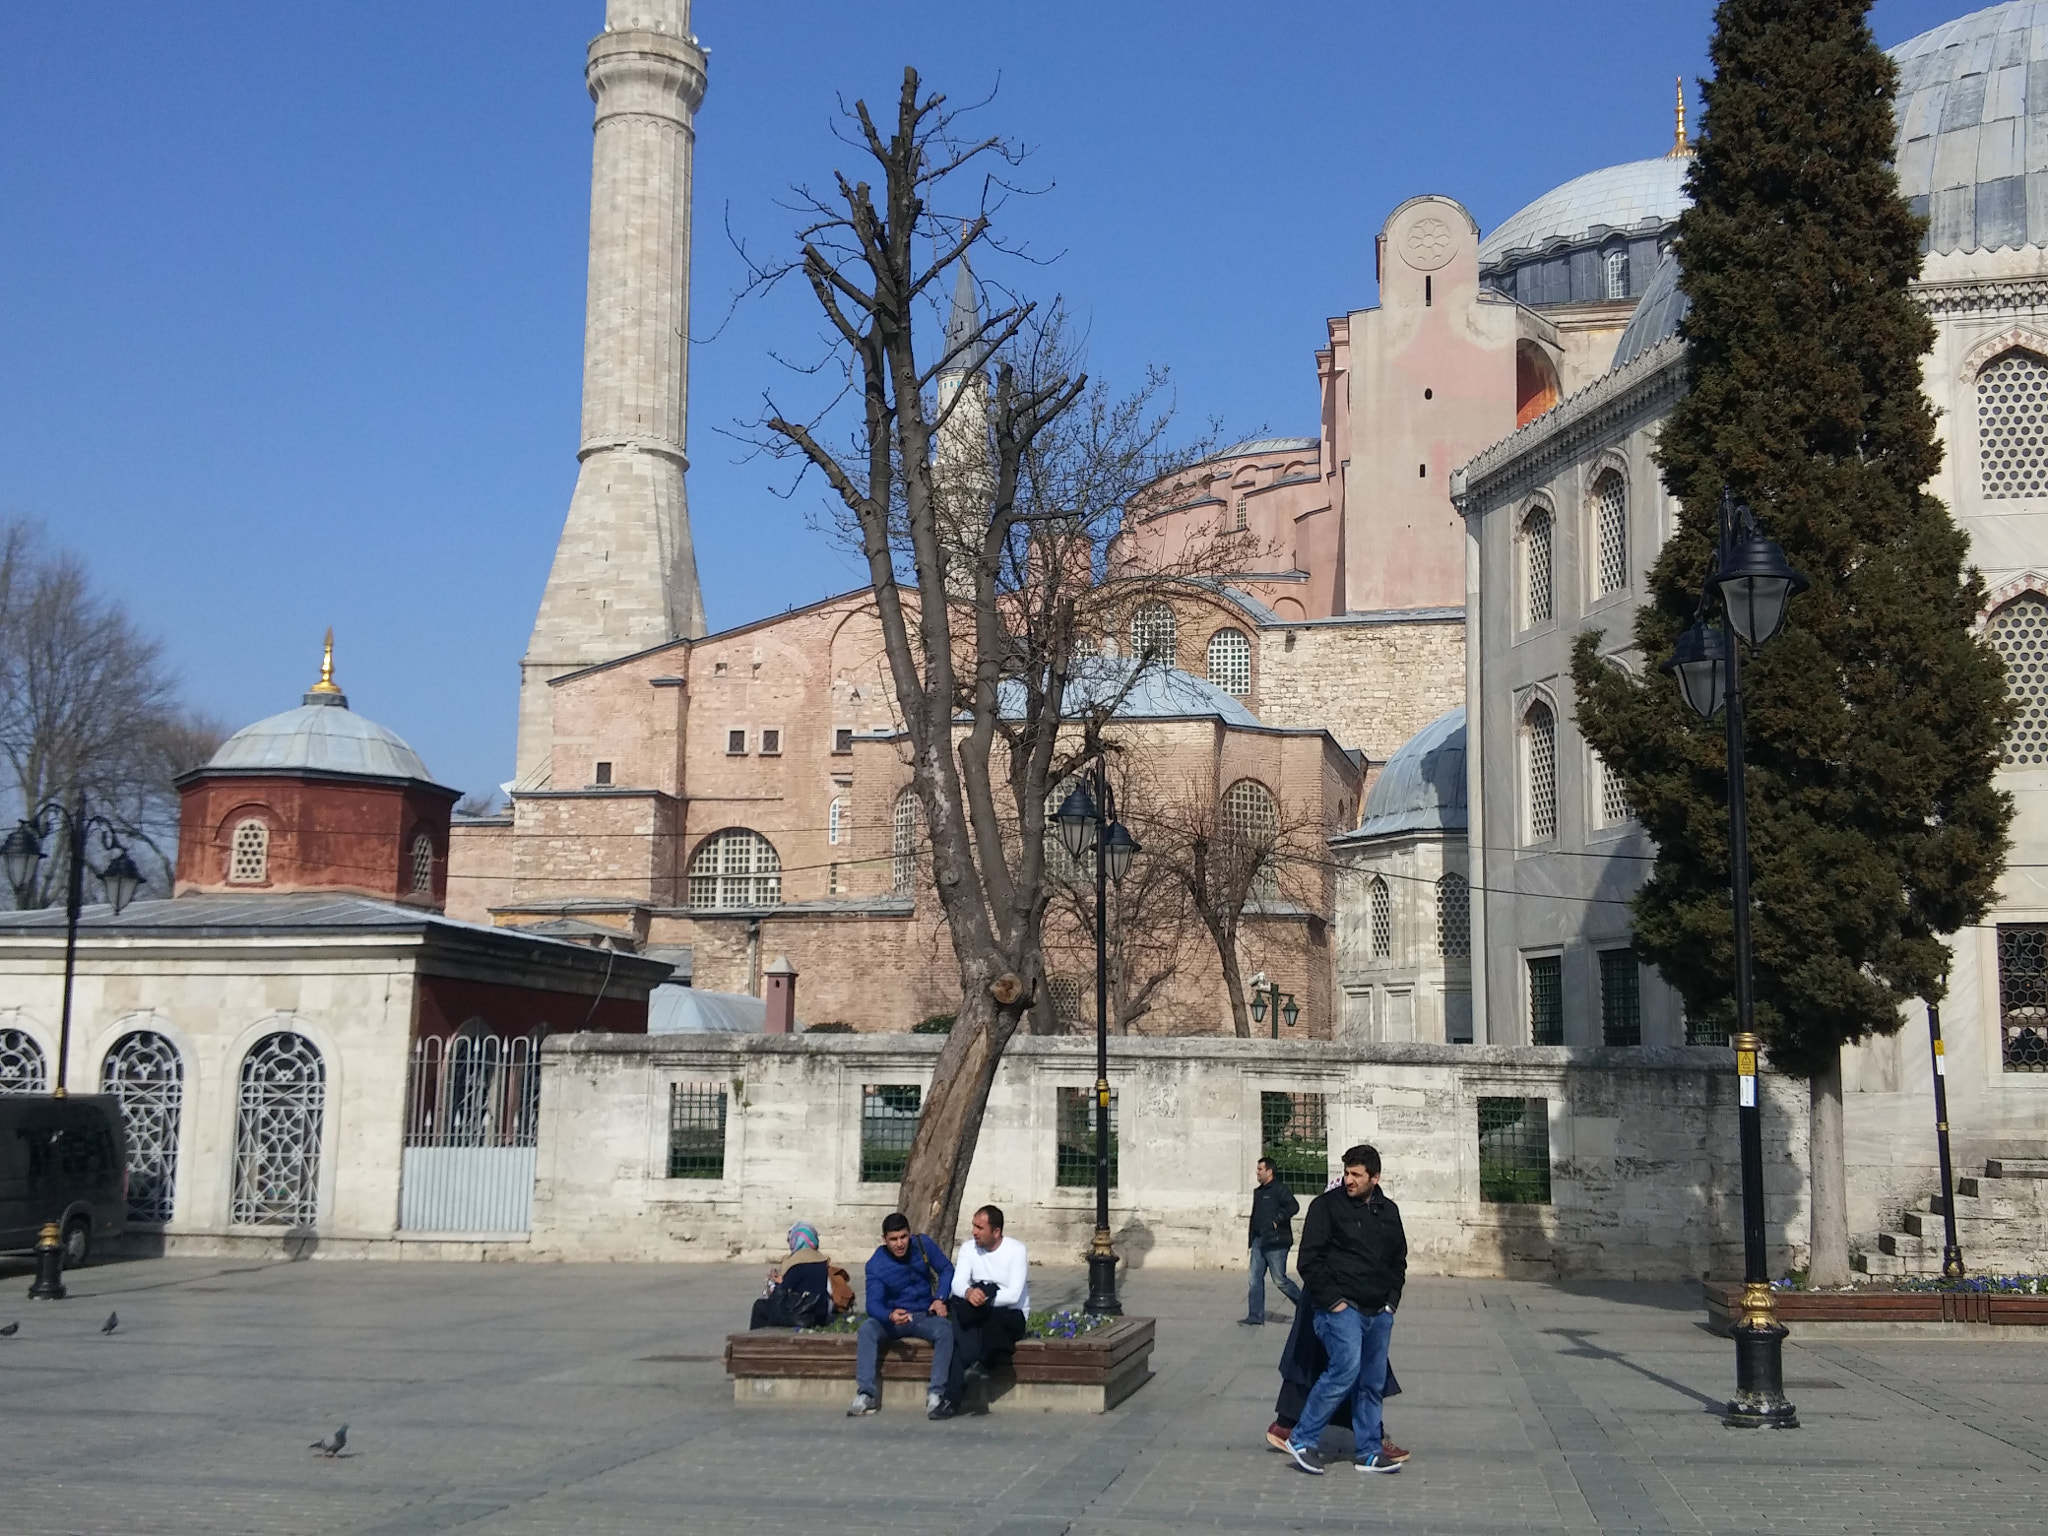 LG G Pro2 sample photo. In front of hagia sophia photography